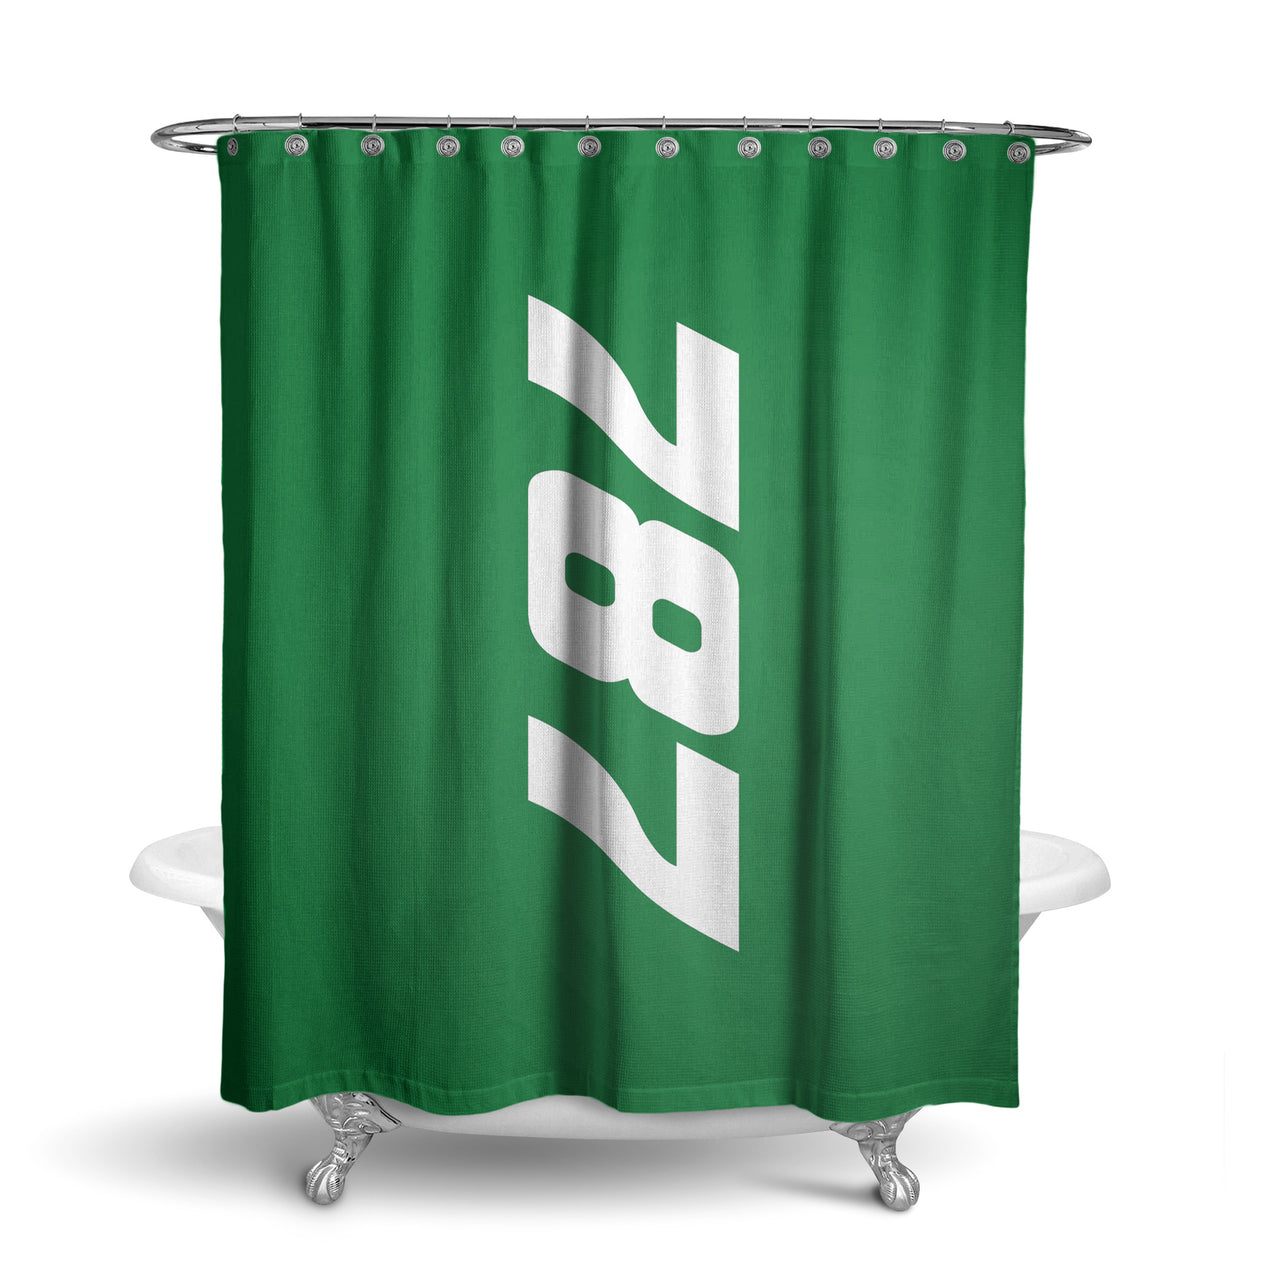 Boeing 787 Text Designed Shower Curtains